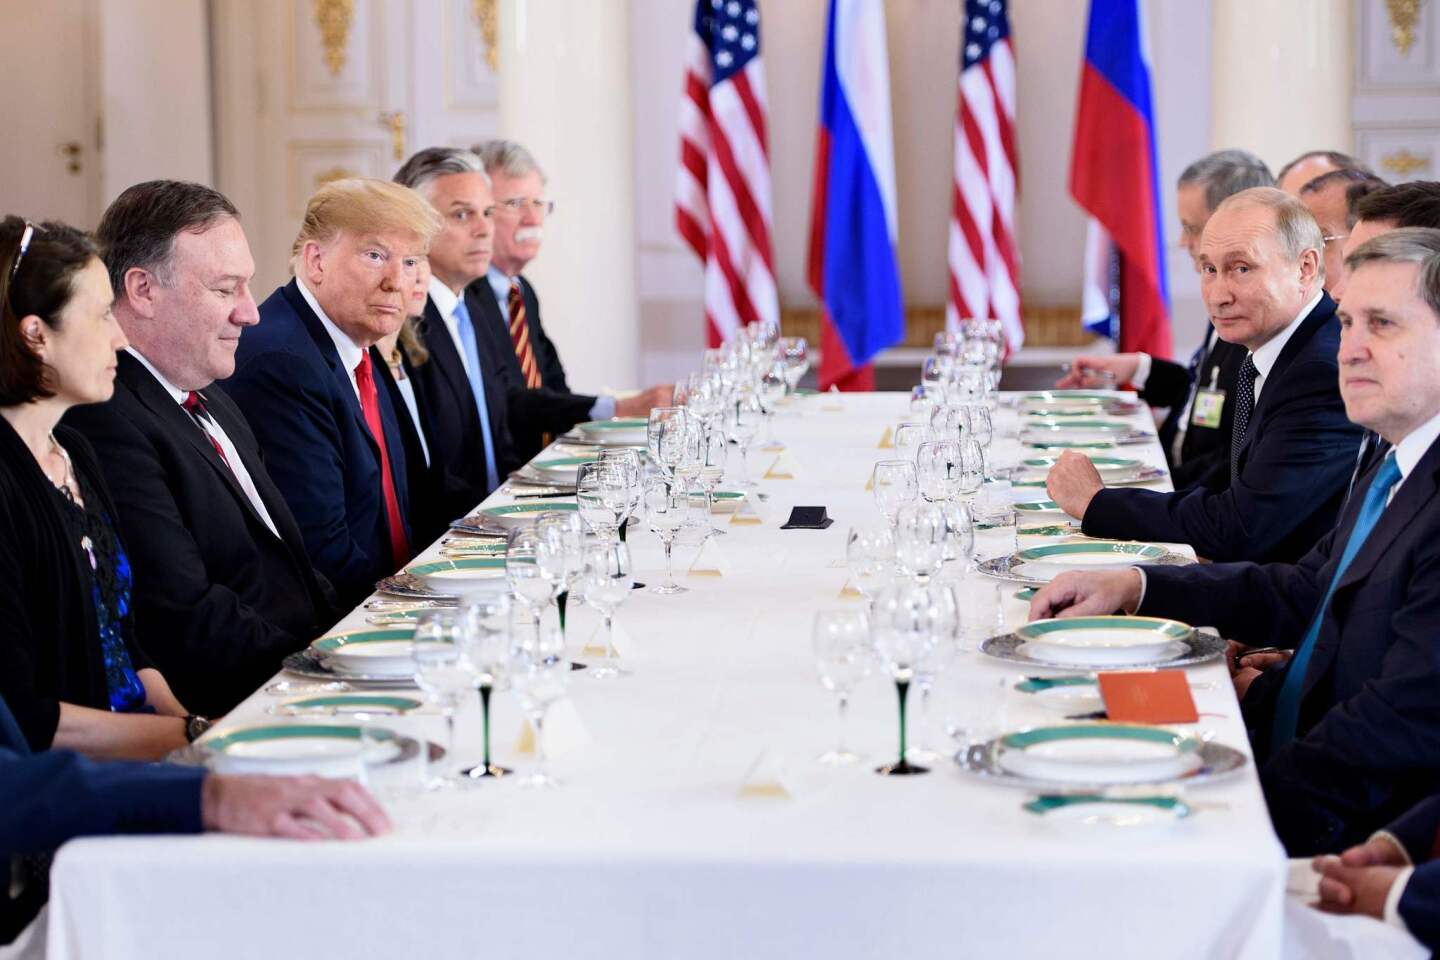 President Trump, center left, and Russia President Vladimir Putin, right, and others wait for a working lunch meeting at Finland's Presidential Palace on July 16 in Helsinki, Finland.